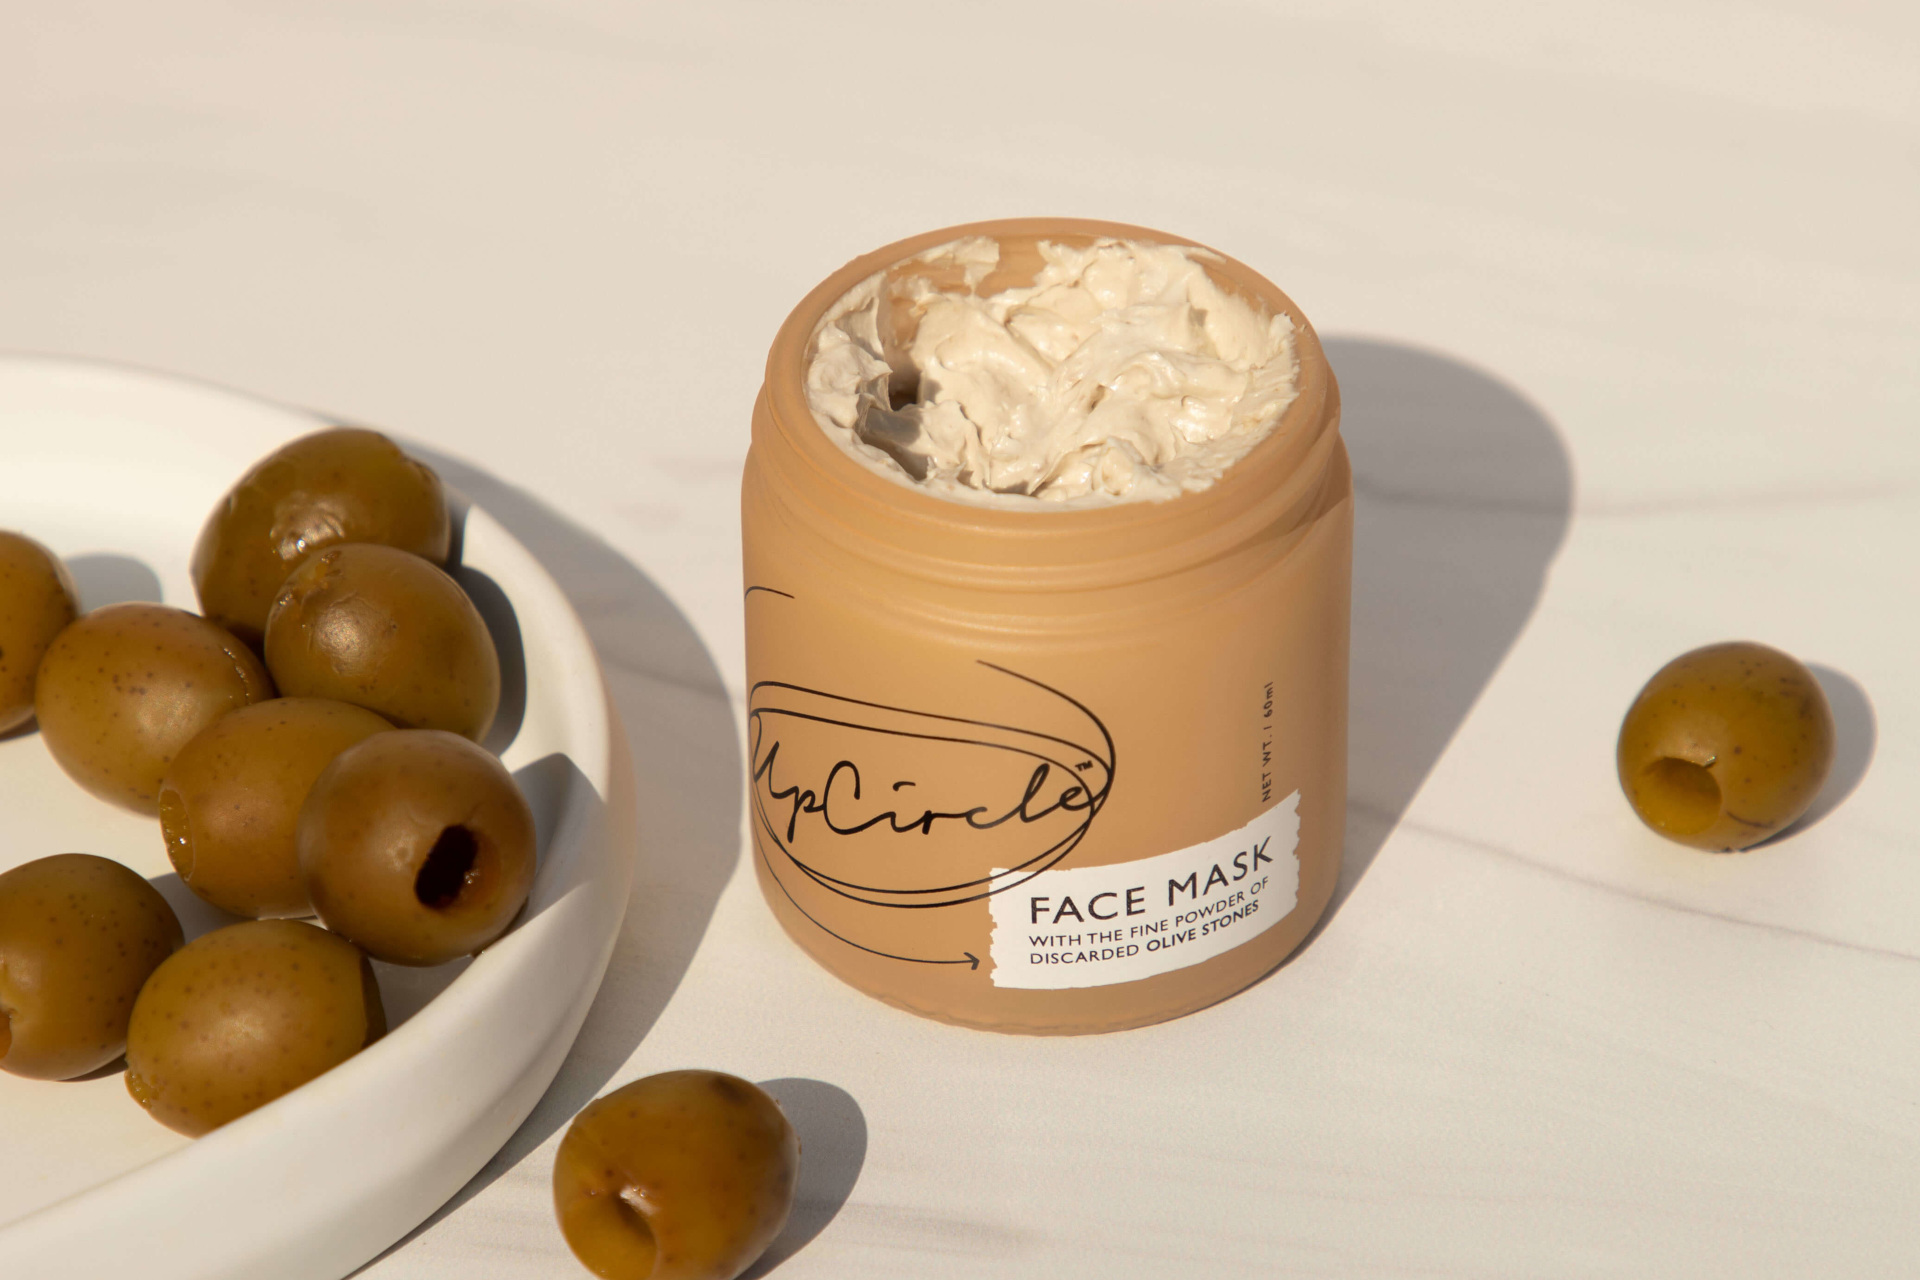 Light brown tub of face cream next to plate of olives